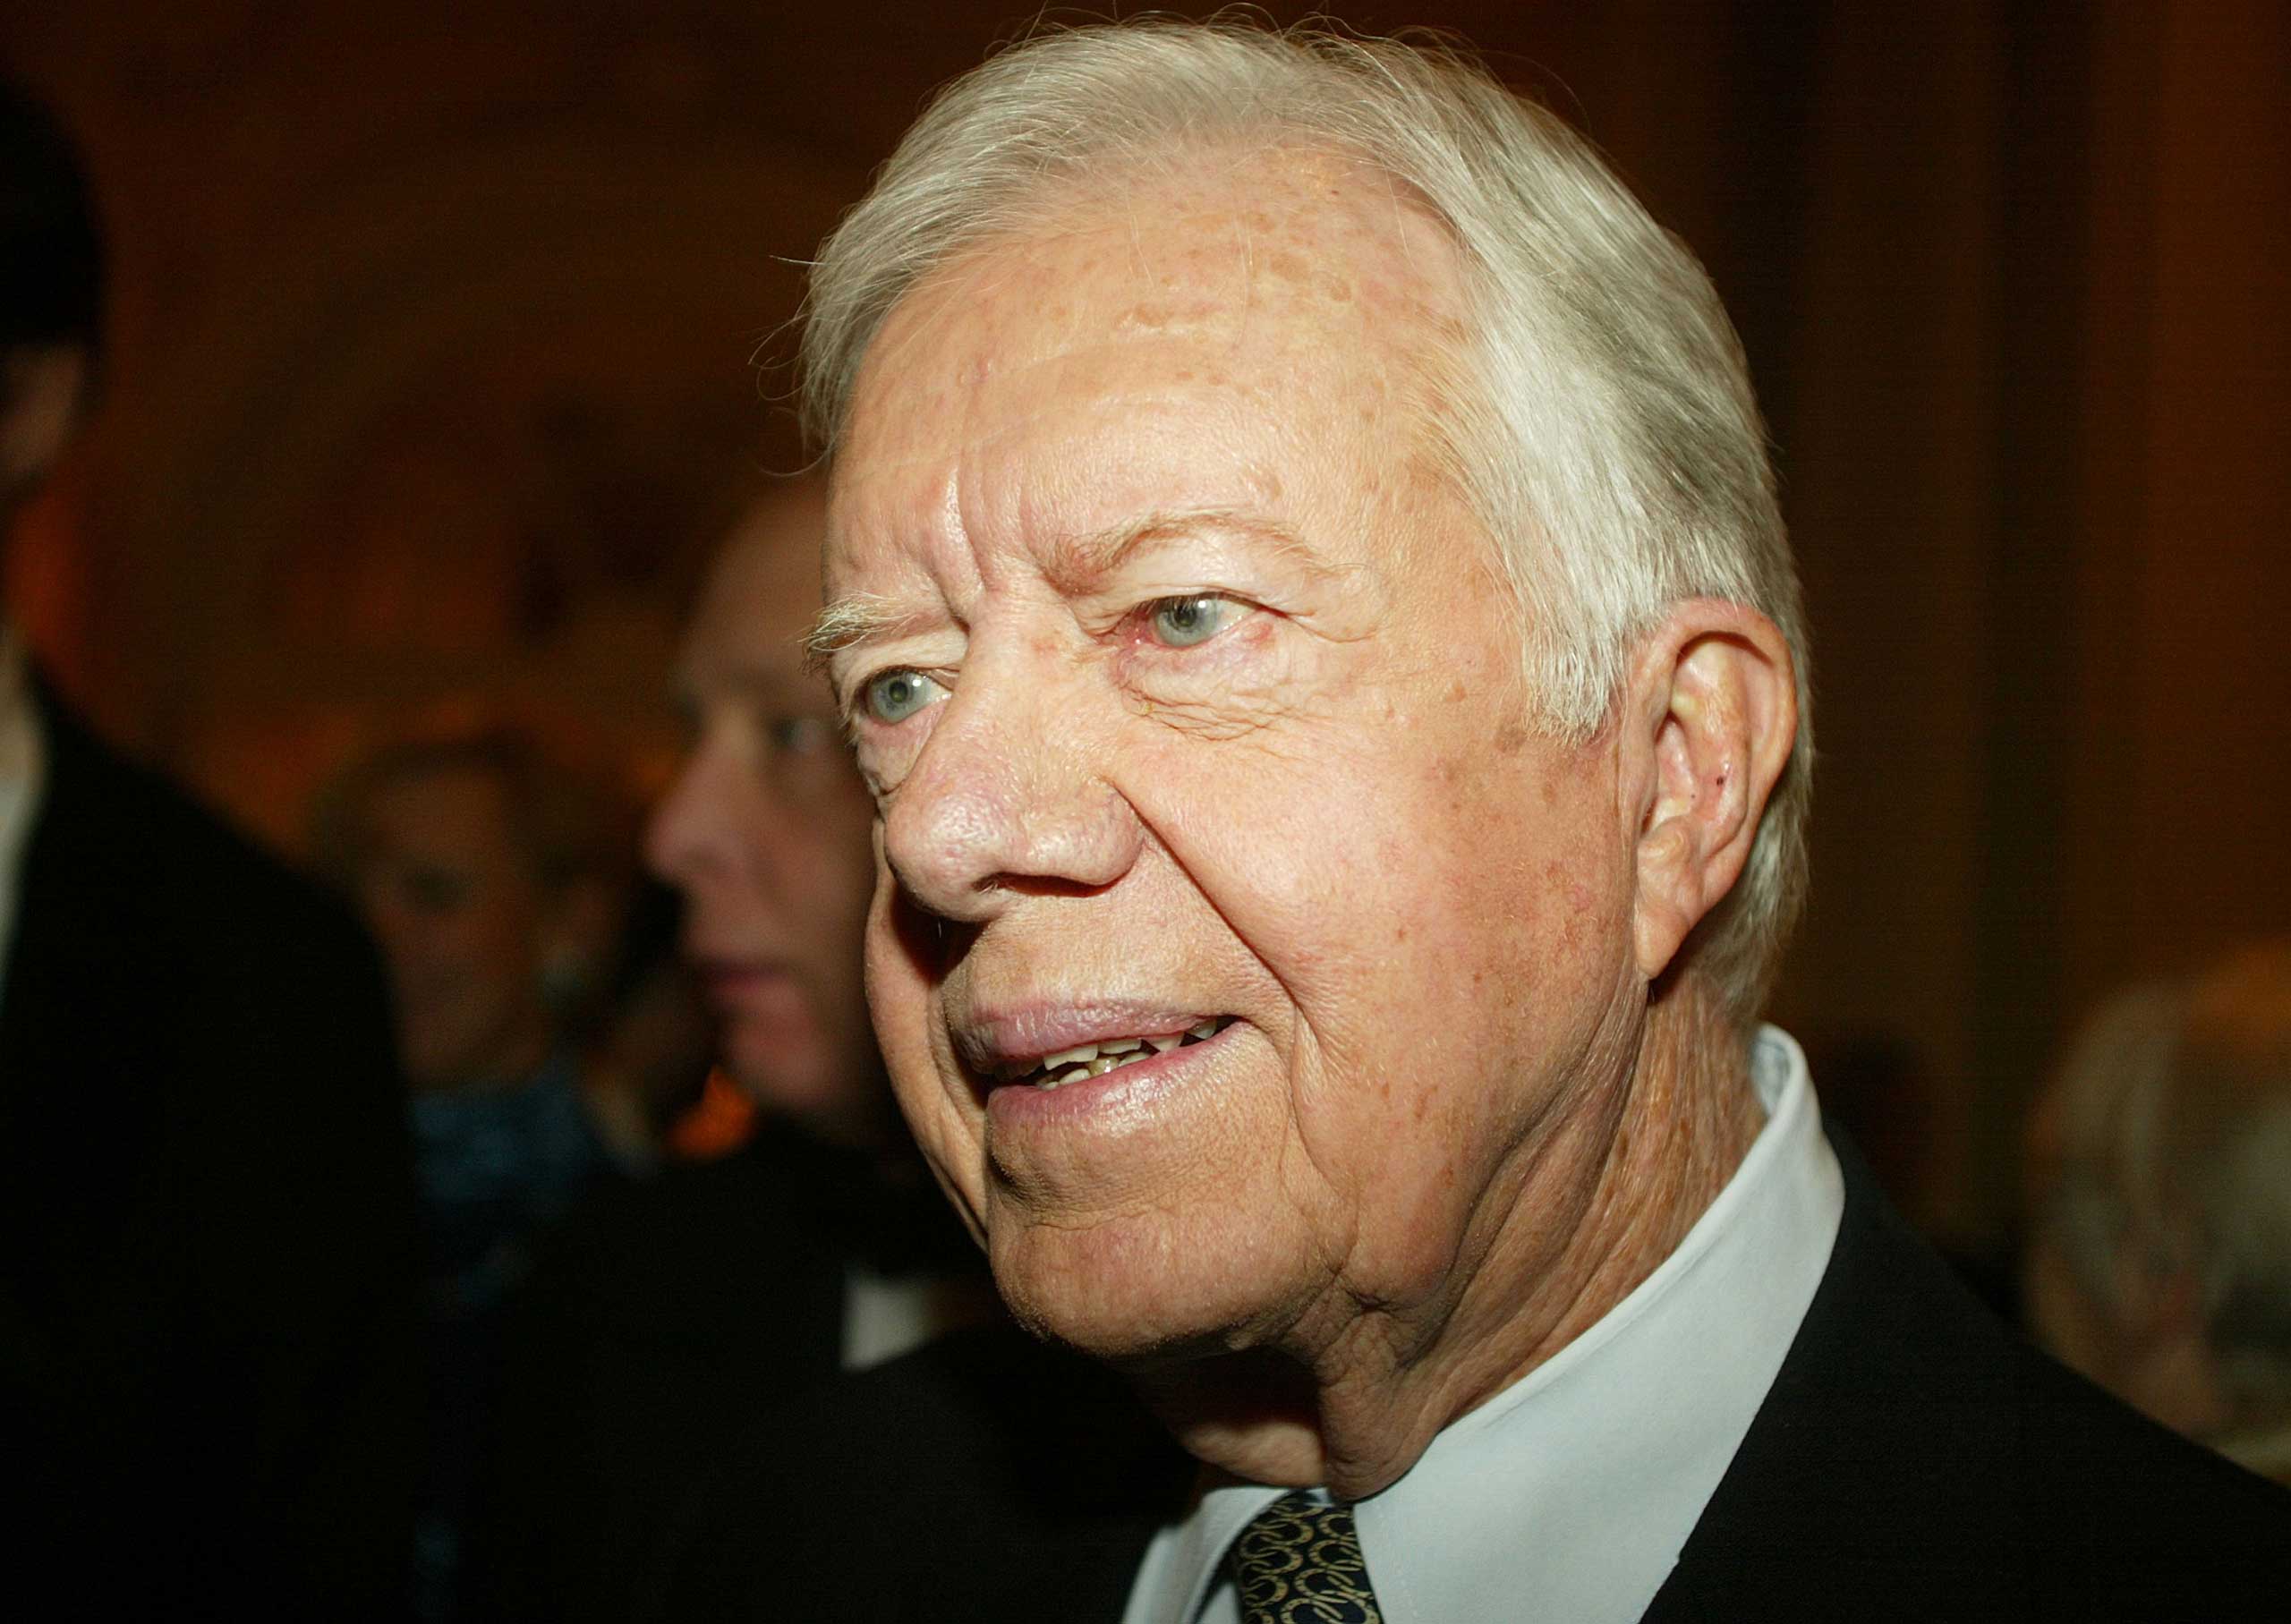 Jimmy Carter, 2002 For his decades of untiring effort to find peaceful solutions to international conflicts, to advance democracy and human rights, and to promote economic and social development